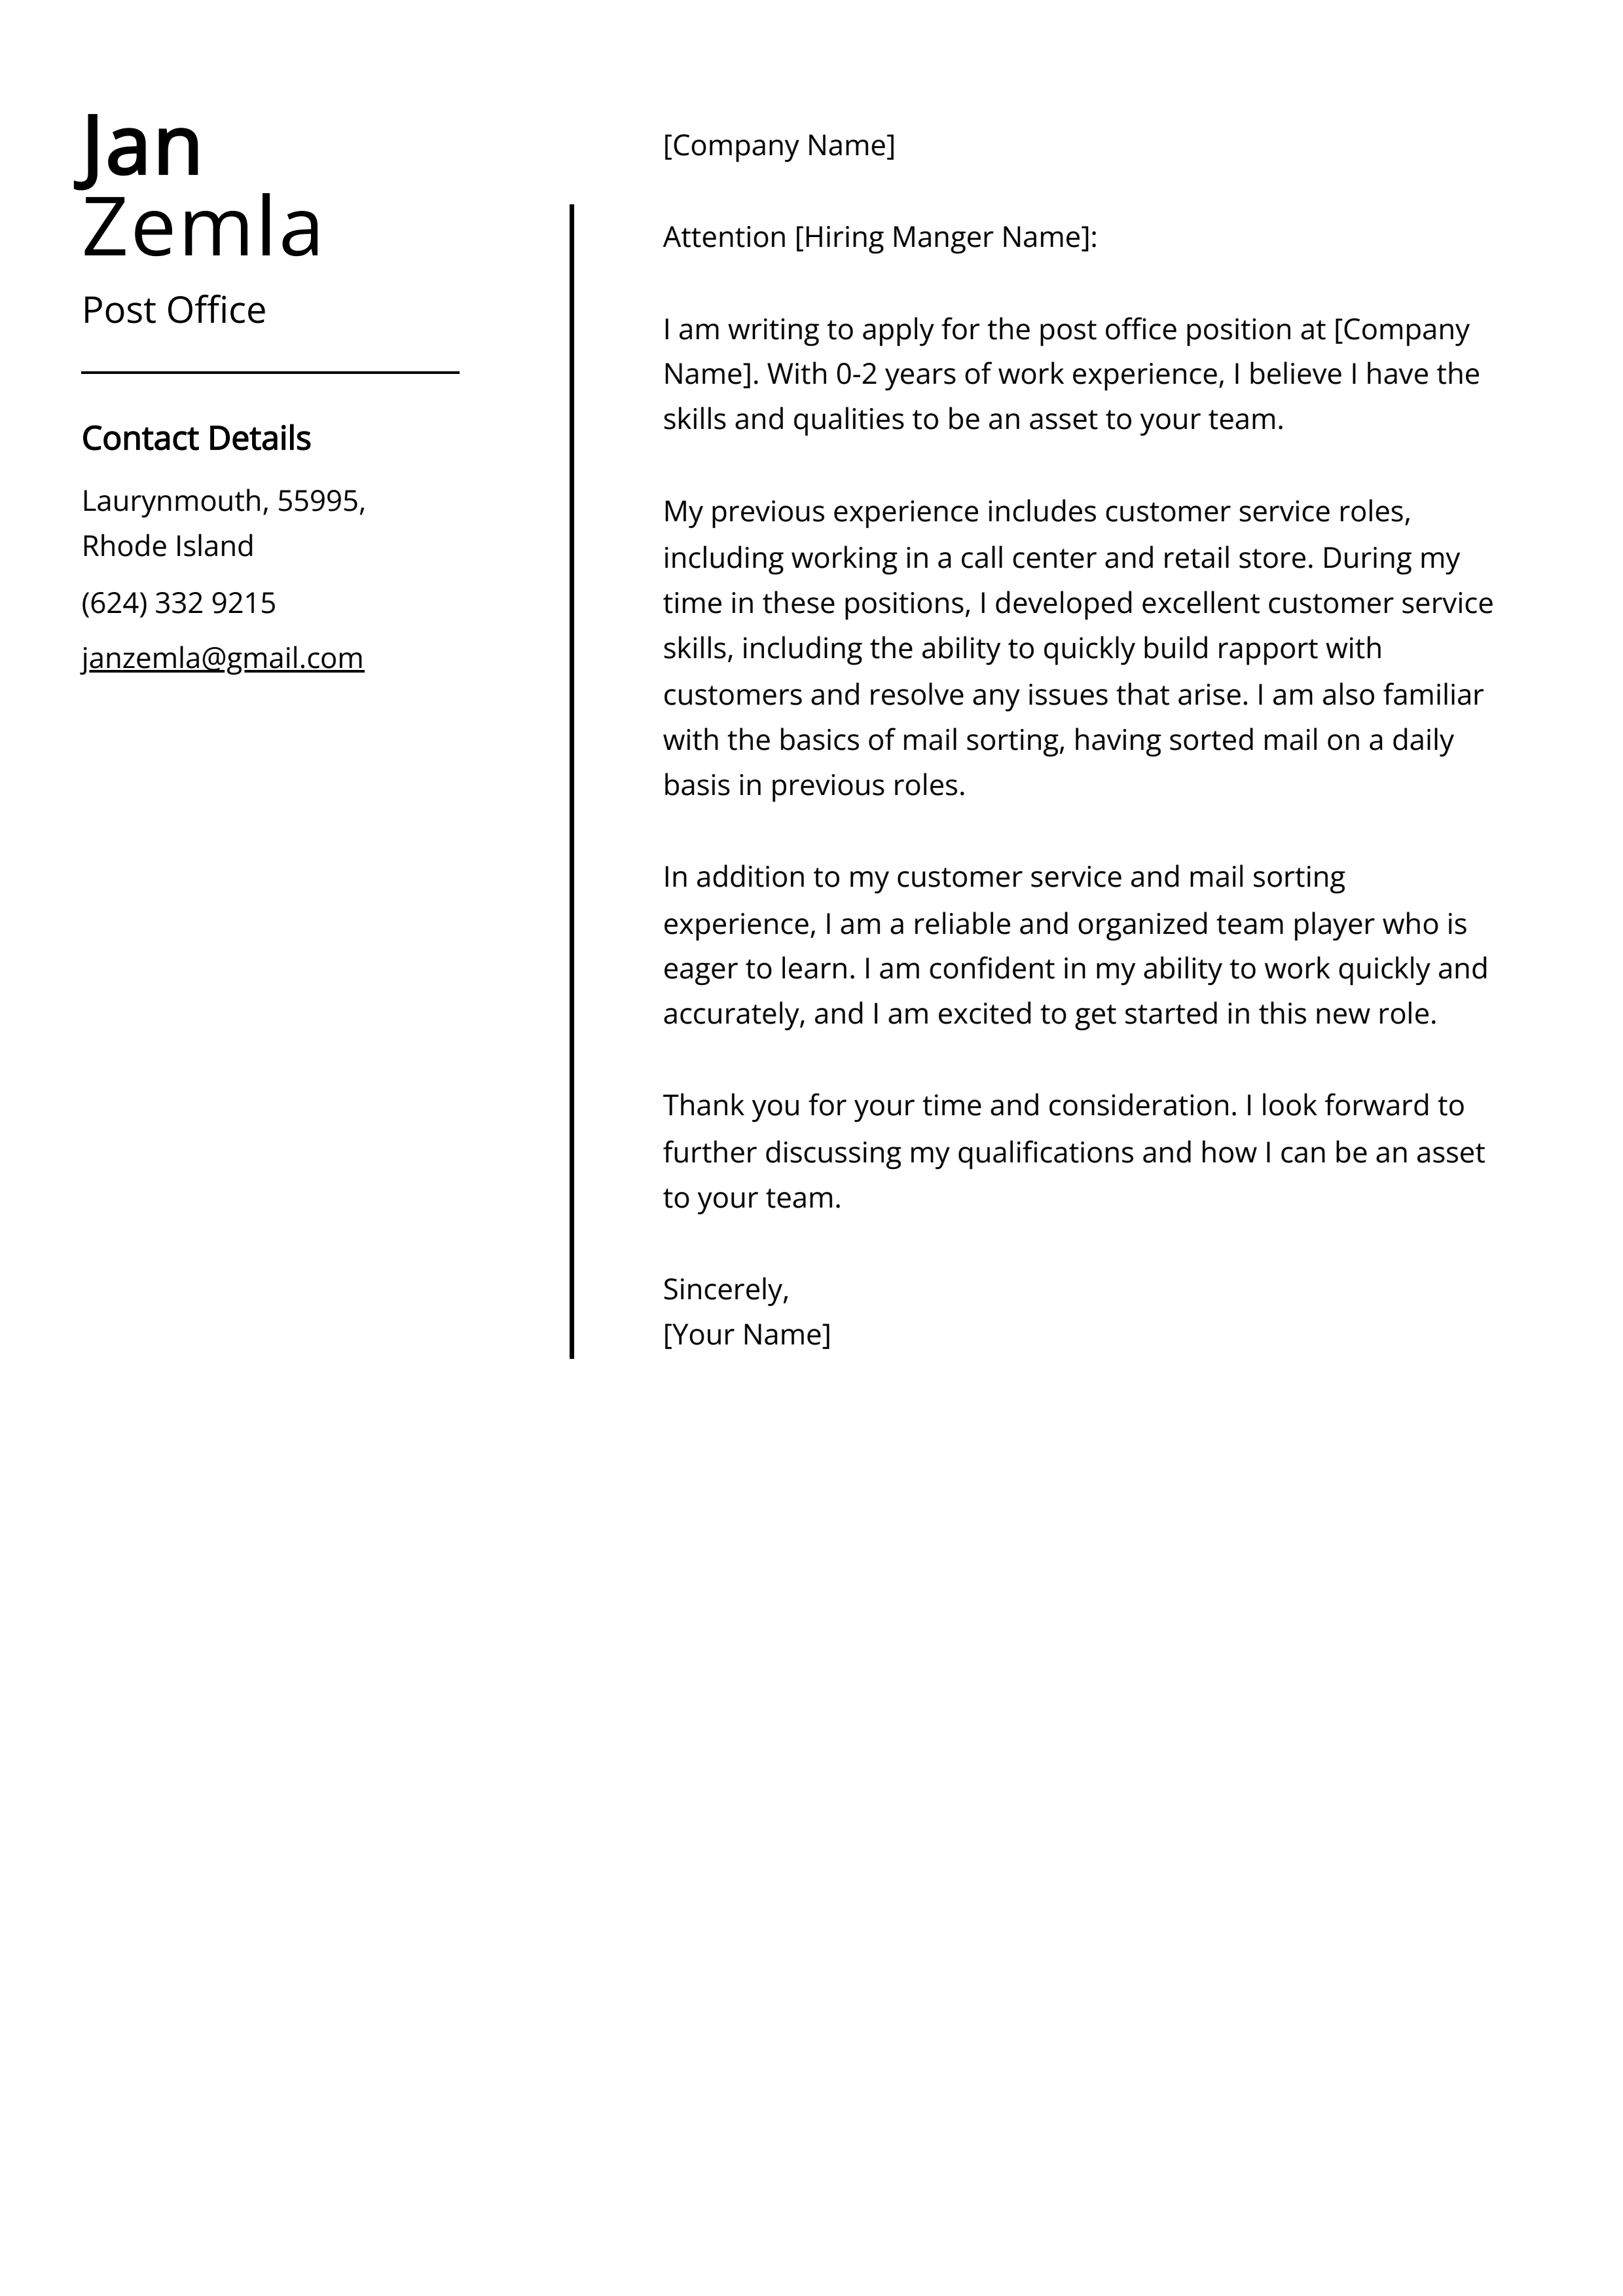 Post Office Cover Letter Example